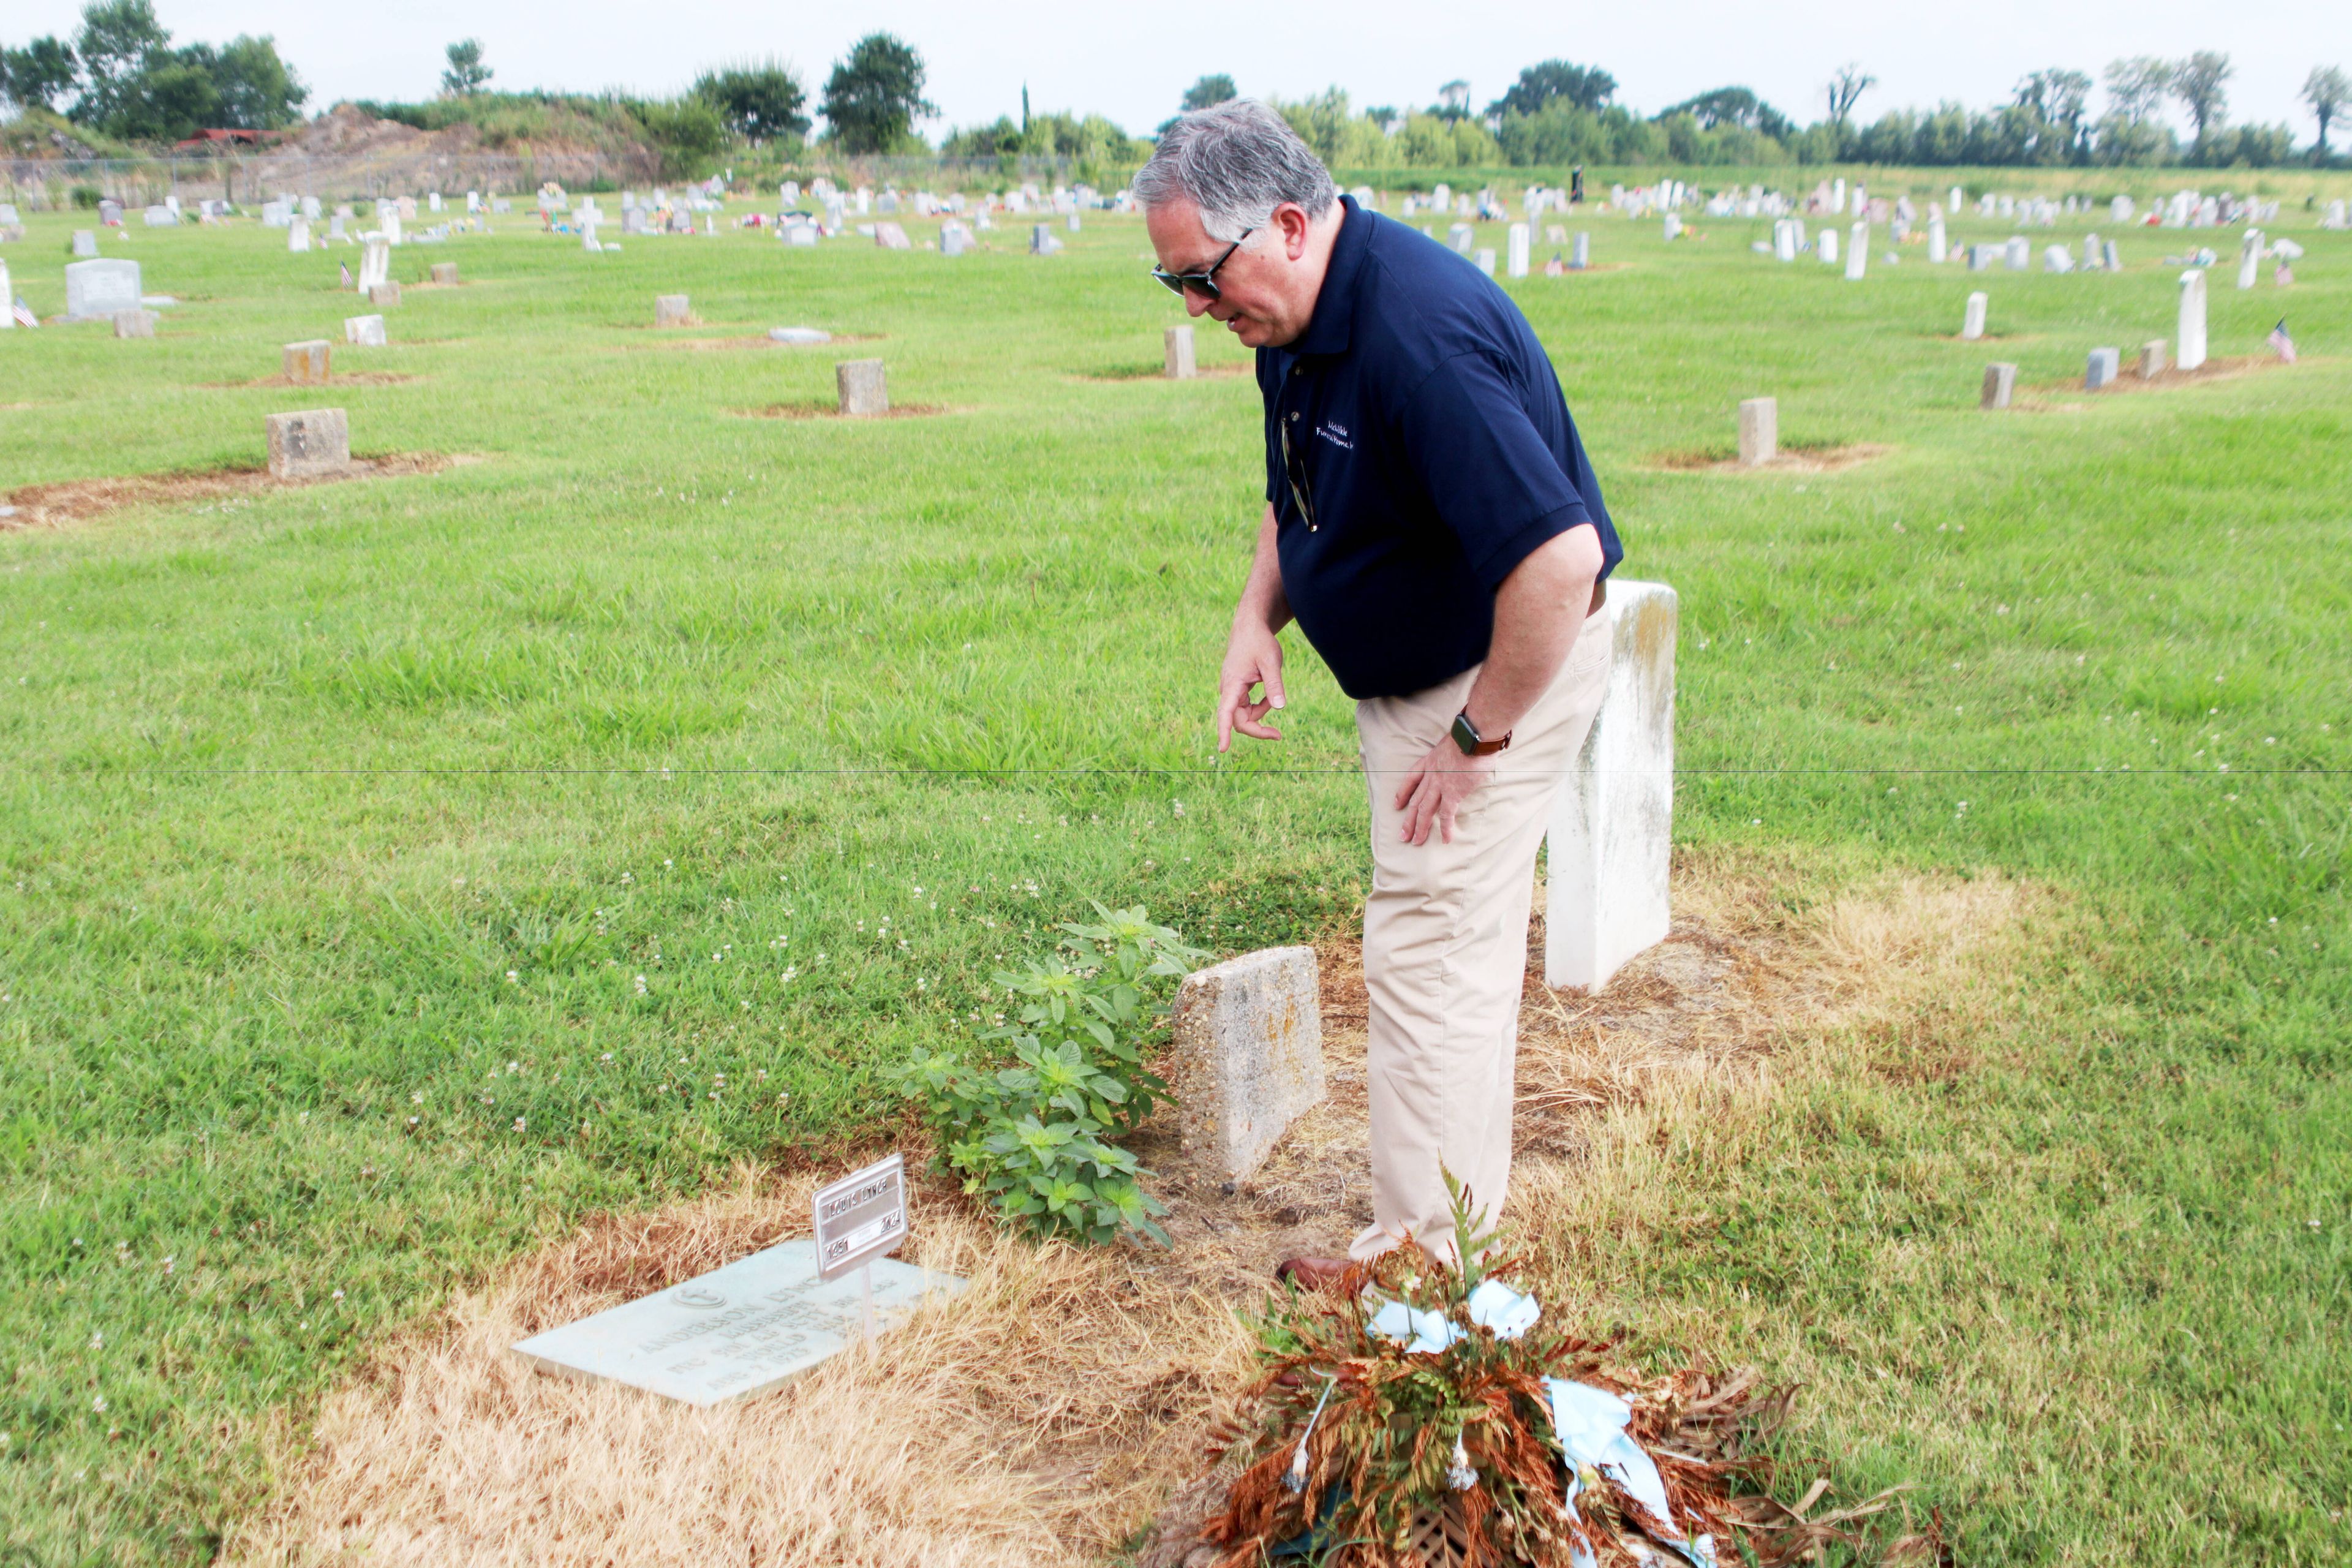 Funeral home director reunites father, son after grave sunk into the ground